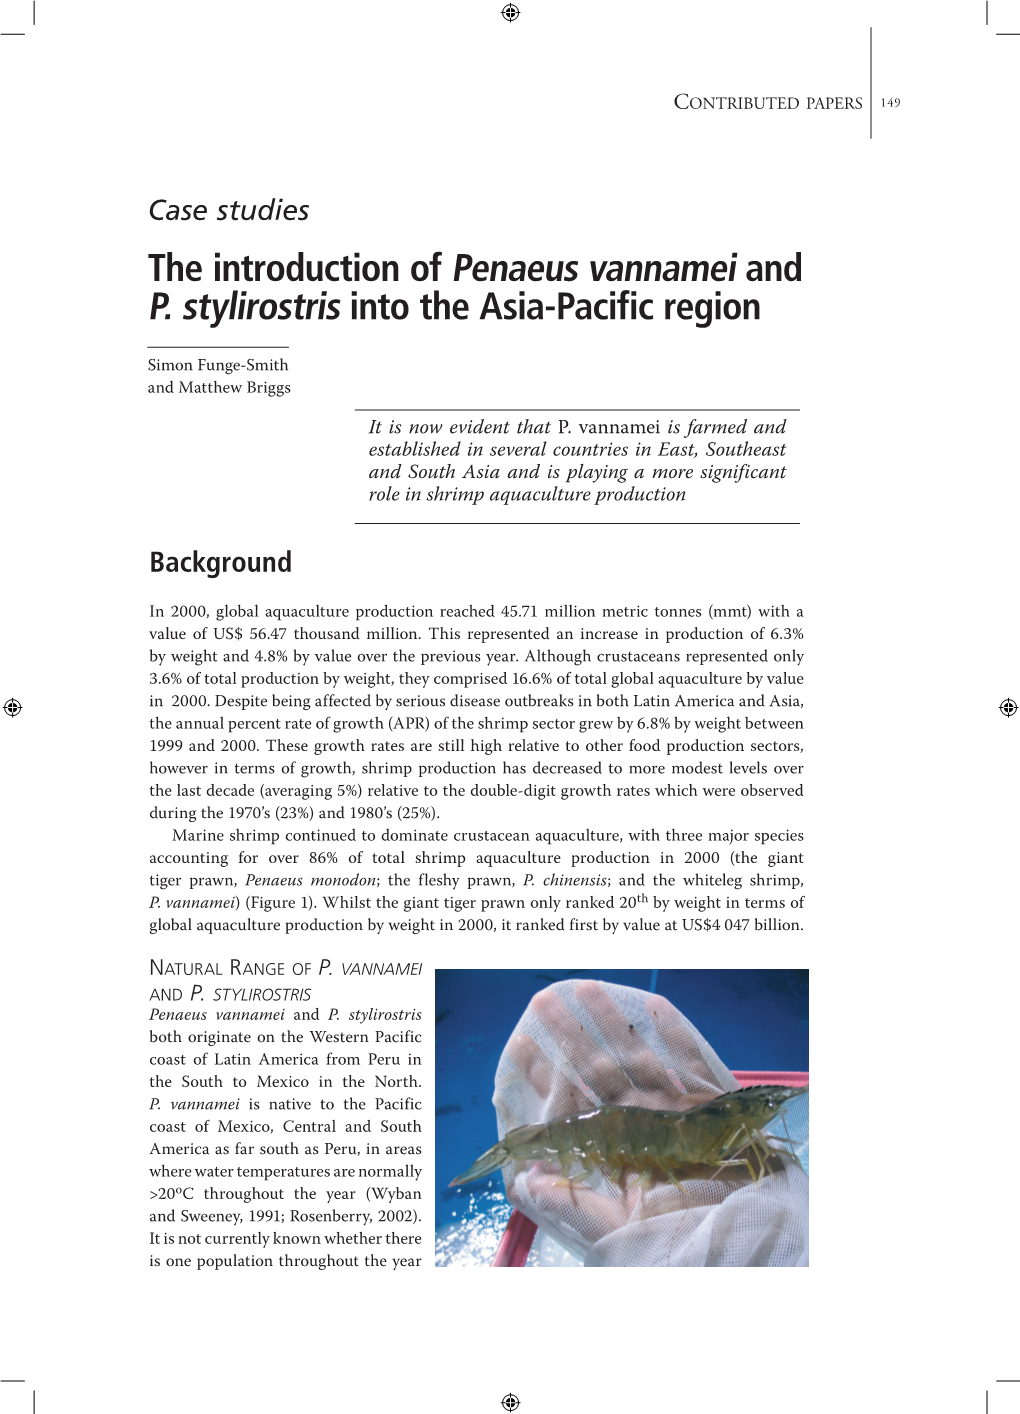 The Introduction of Penaeus Vannamei and P. Stylirostris Into the Asia-Pacific Region